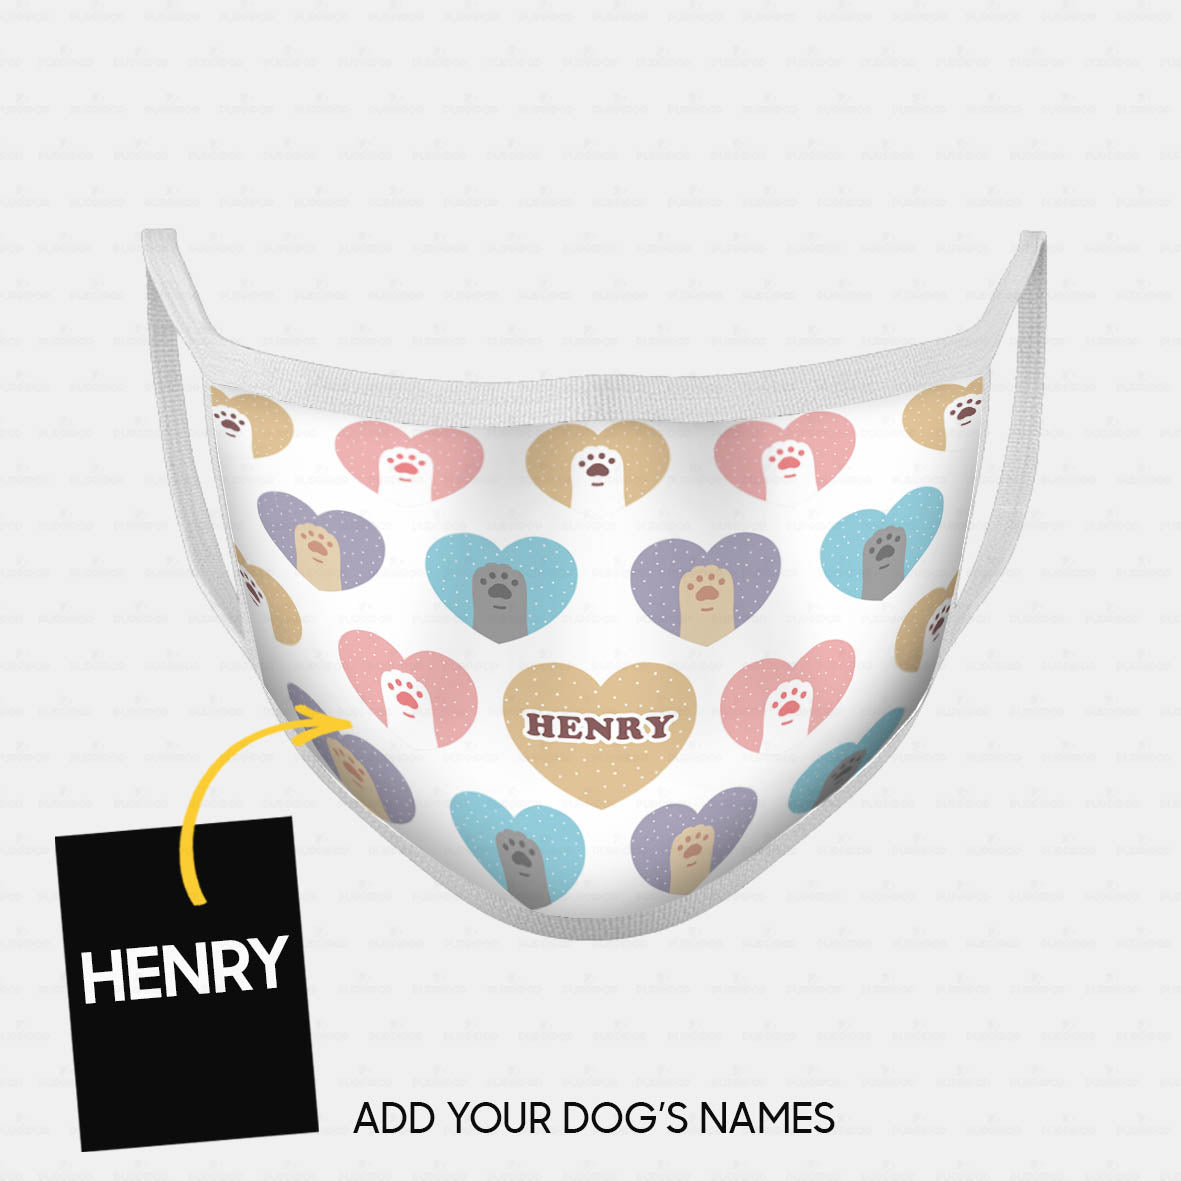 Personalized Dog Gift Idea - Colorful Paws In Colorful Hearts On White For Dog Lovers - Cloth Mask